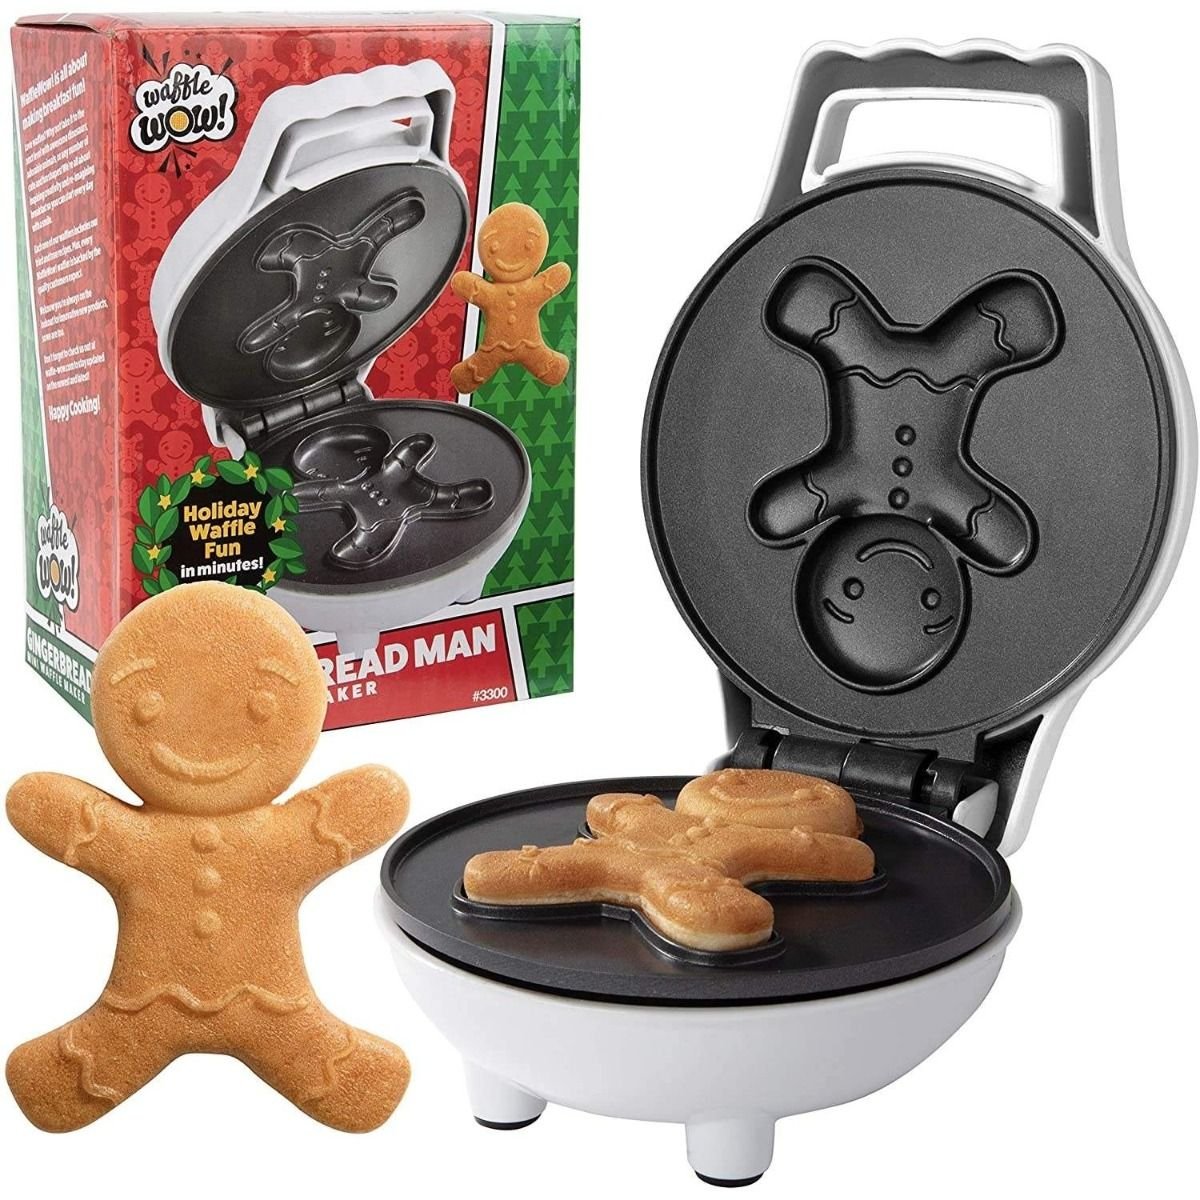 Mini Waffle Maker Dinosaur Waffle Iron for Kids 7 Unique Dino Waffle in  Minutes, Electric Nonstick Waffle Pancakes Maker with Removable Plates